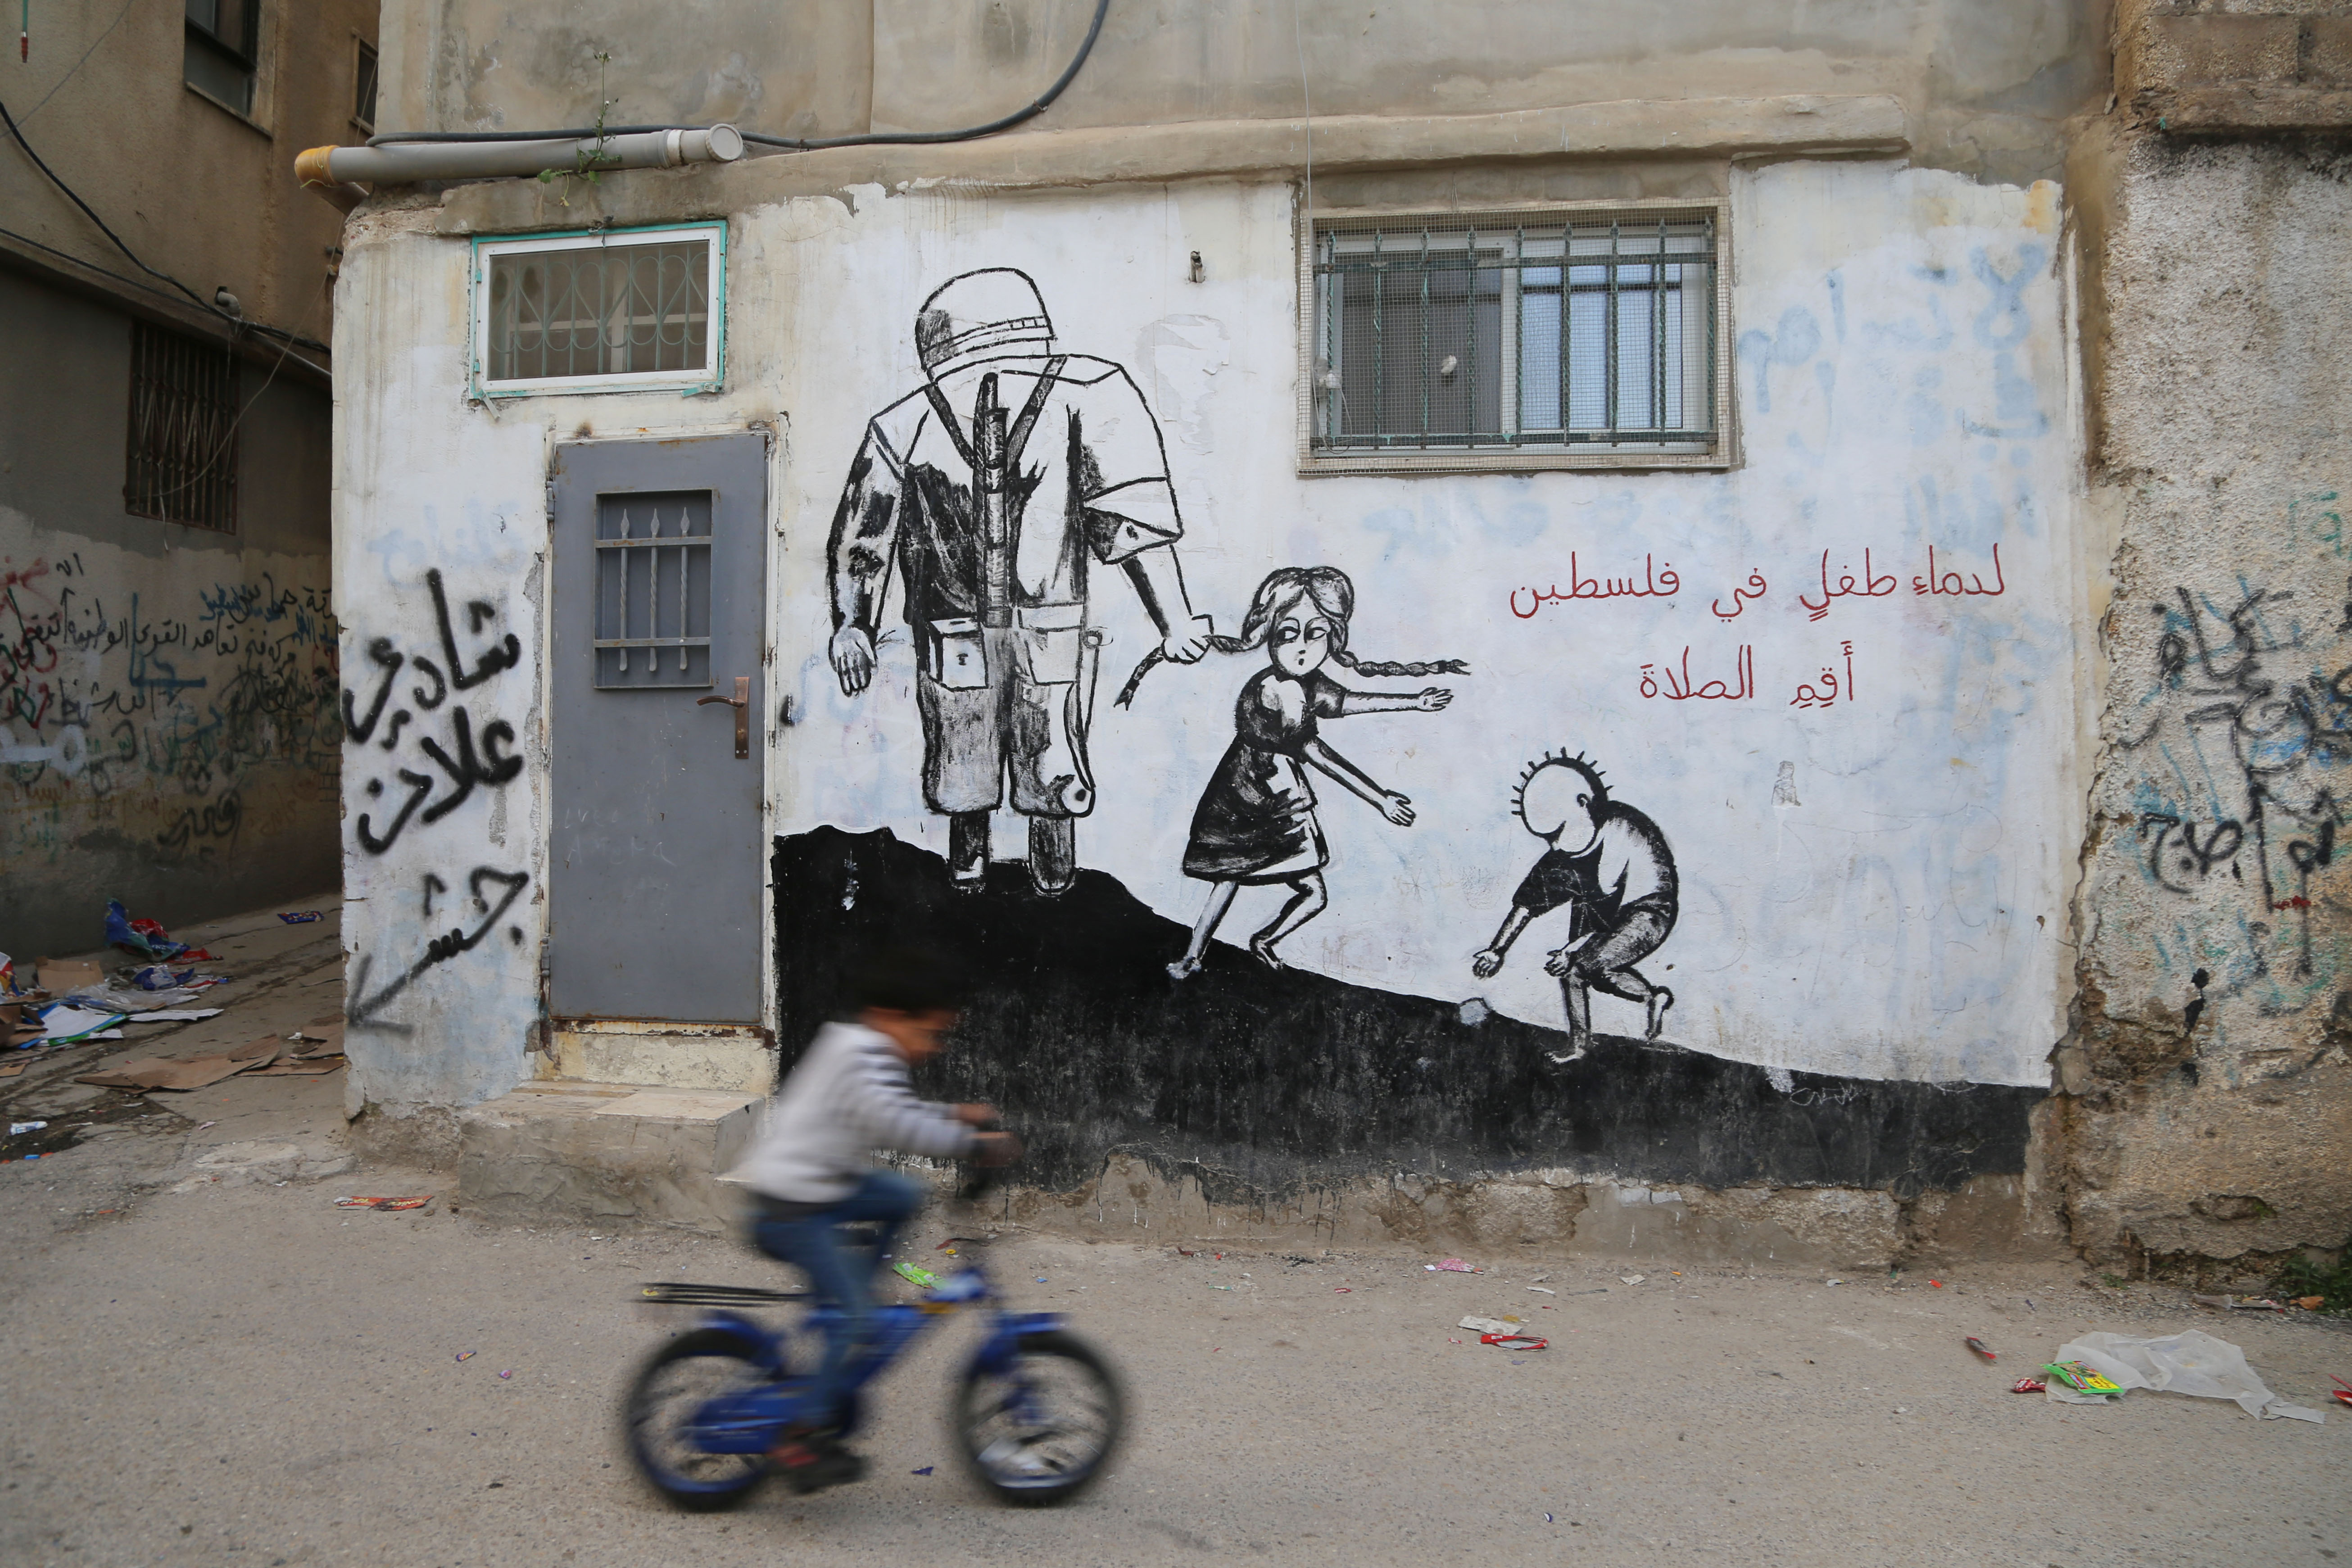 A child bicycles by a mural in Aida refugee camp. Aida is one of the 58 recognized refugee camps established after 1948 to accommodate Palestinians who were expelled in the 1948 Palestinian exodus. Keys are a popular motif of the camp, because many of the camp’s refugees still have their keys to their 1948 homes. Aida means “one who will return.”